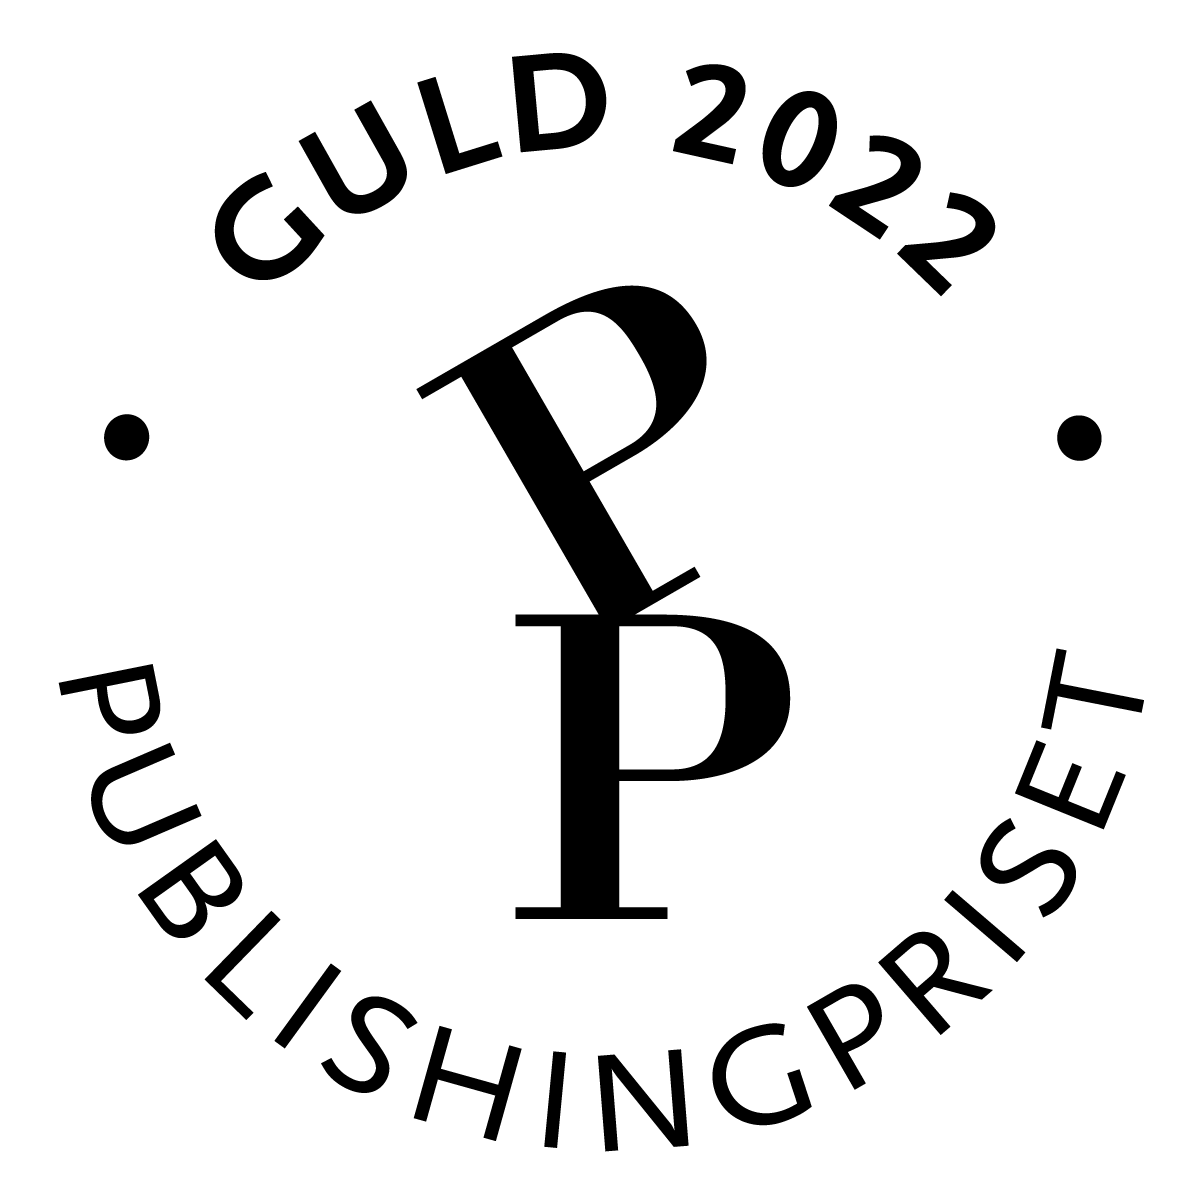 Competing in the 2022 Publishing Prize